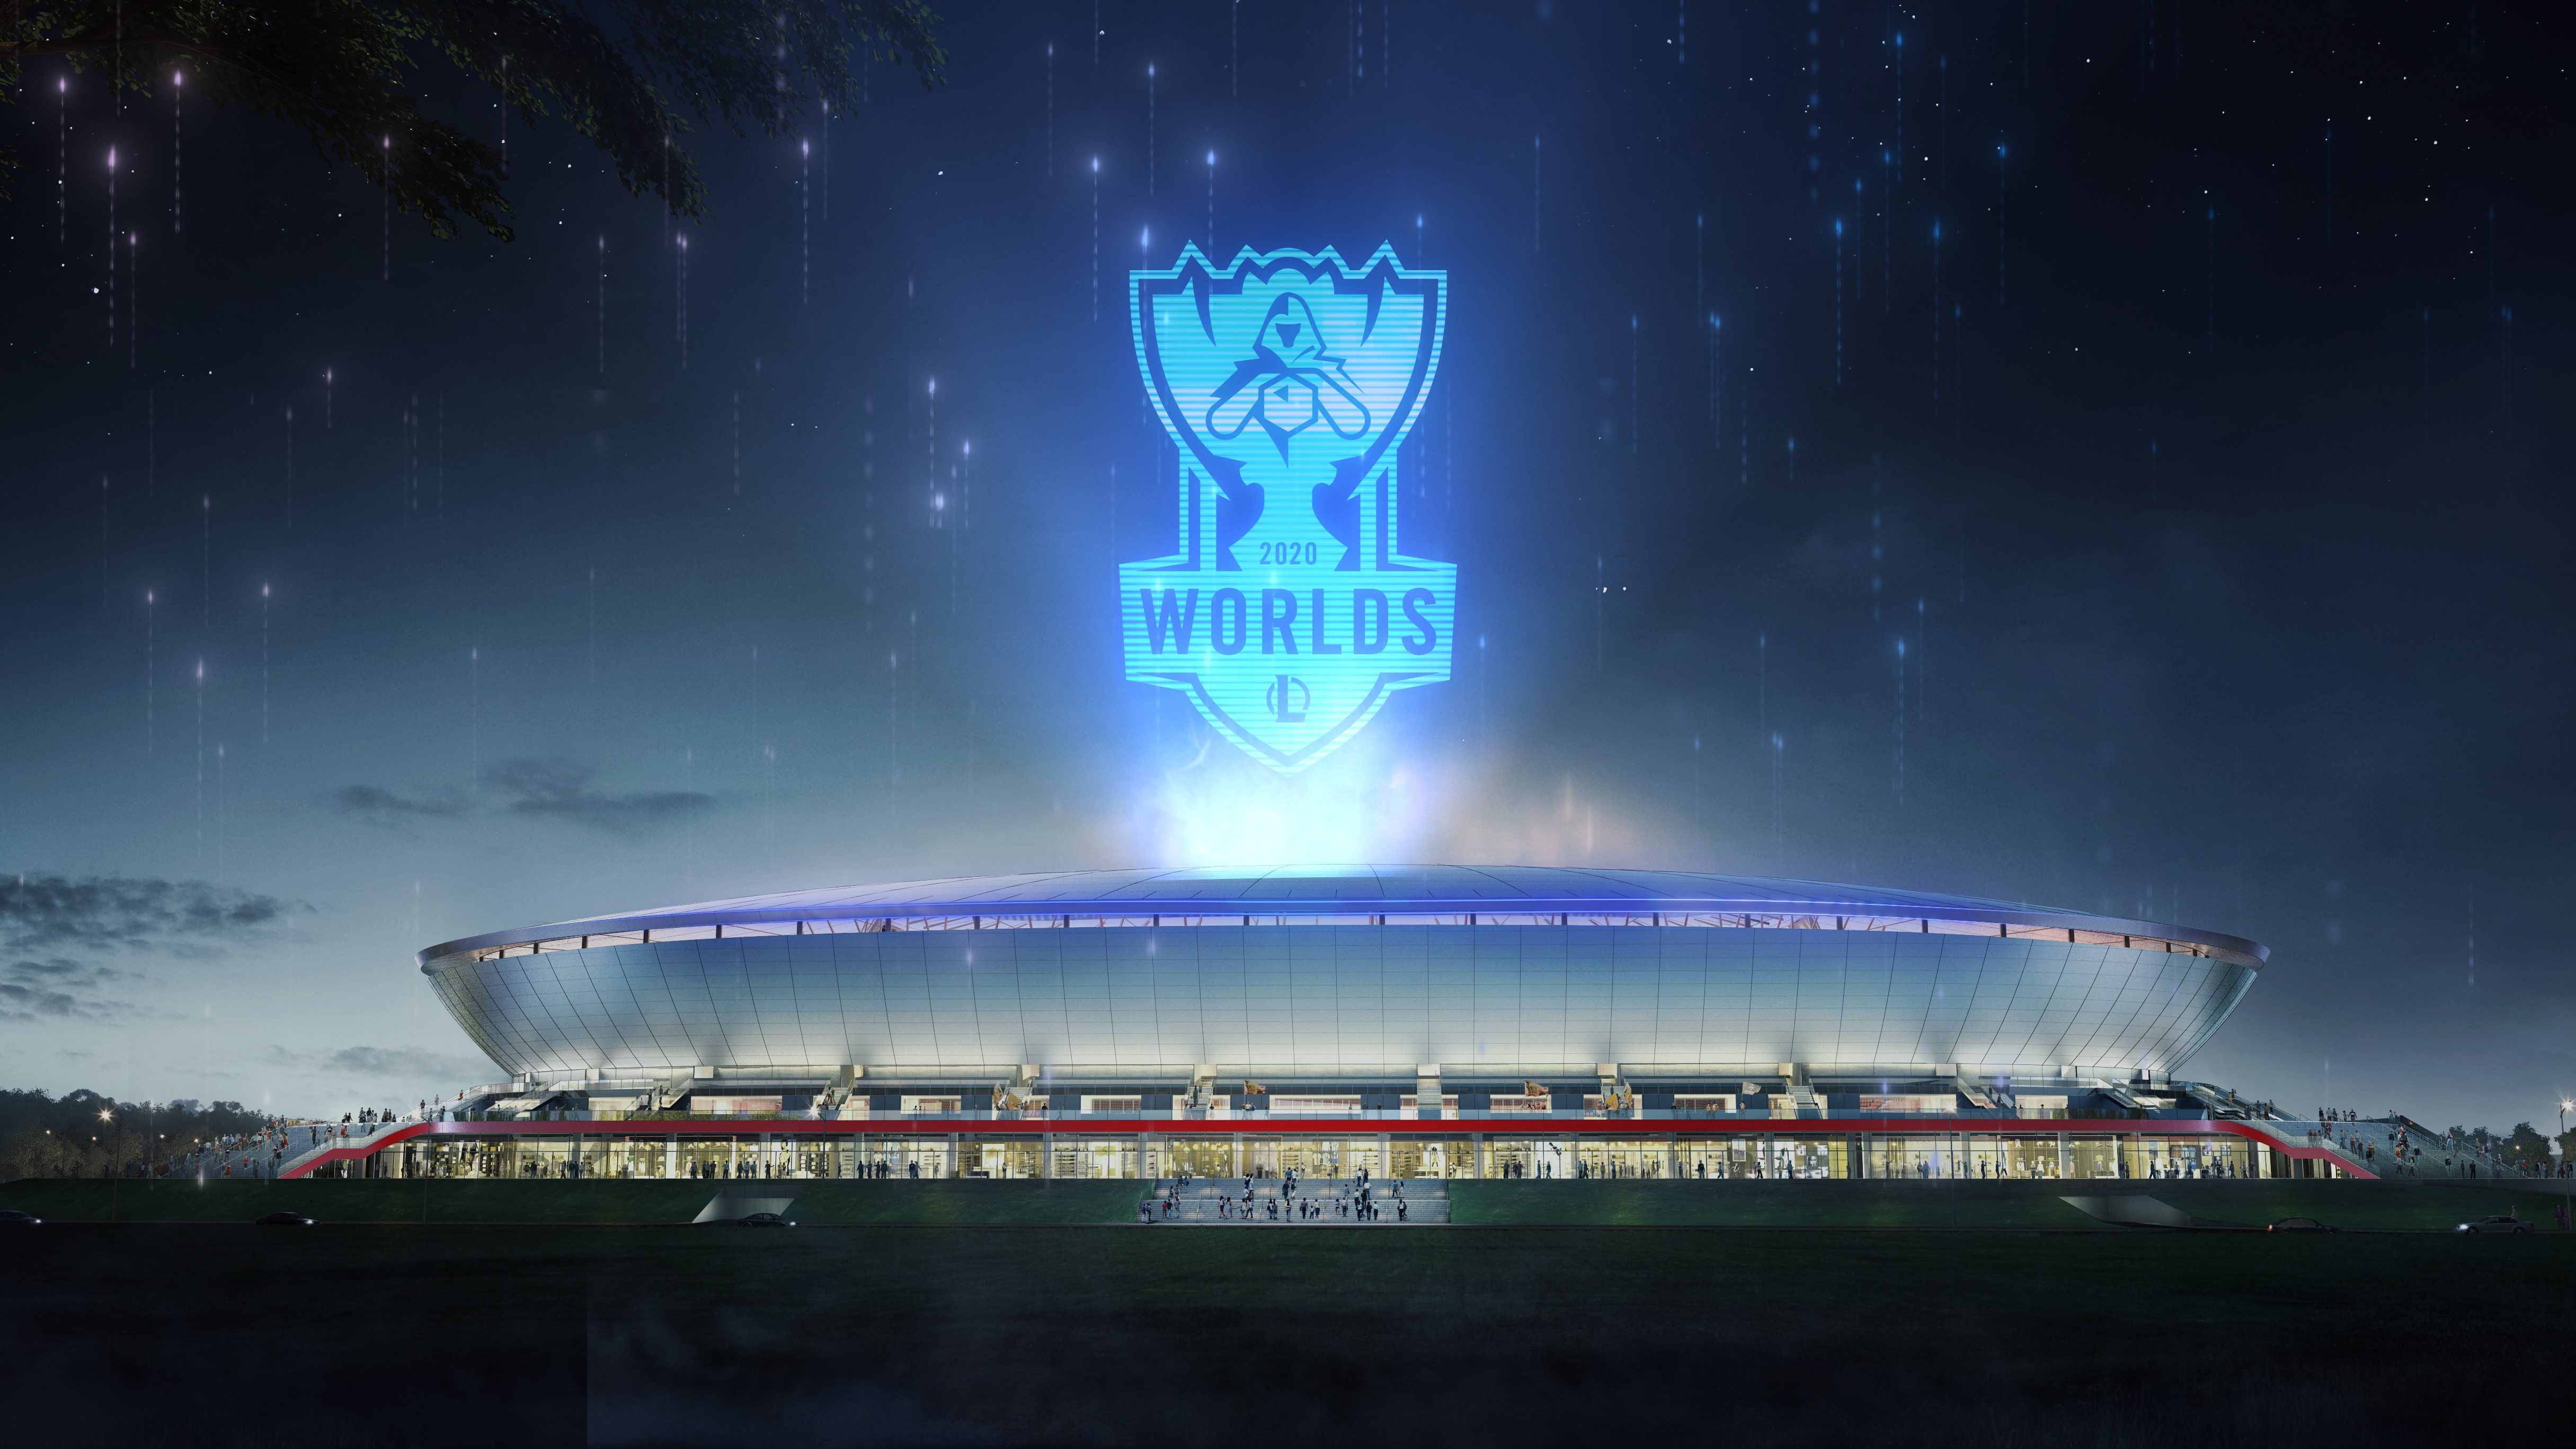 The League of Legends World Championship logo floats over the Pudong Soccer Stadium in Shanghai